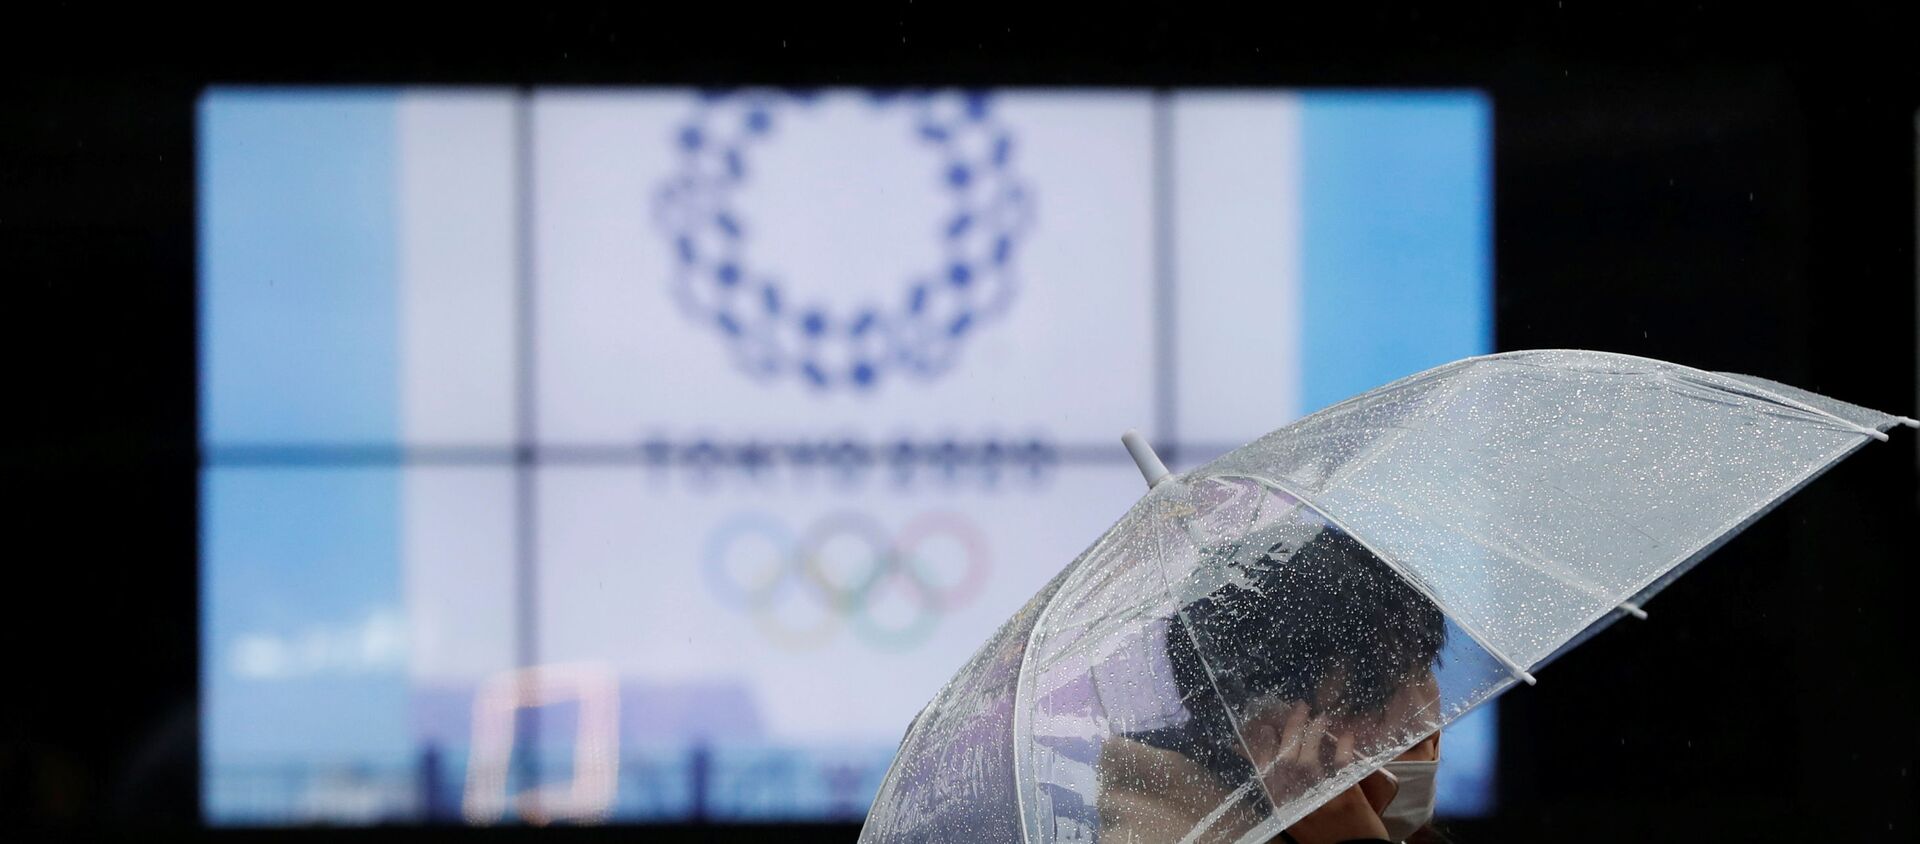 A passerby wearing a protective face mask walks past a display showing the logo of Tokyo 2020 Olympic Games that have been postponed to 2021 due to the coronavirus disease (COVID-19) outbreak, in Tokyo, Japan January 23, 2021. - 俄罗斯卫星通讯社, 1920, 03.03.2021